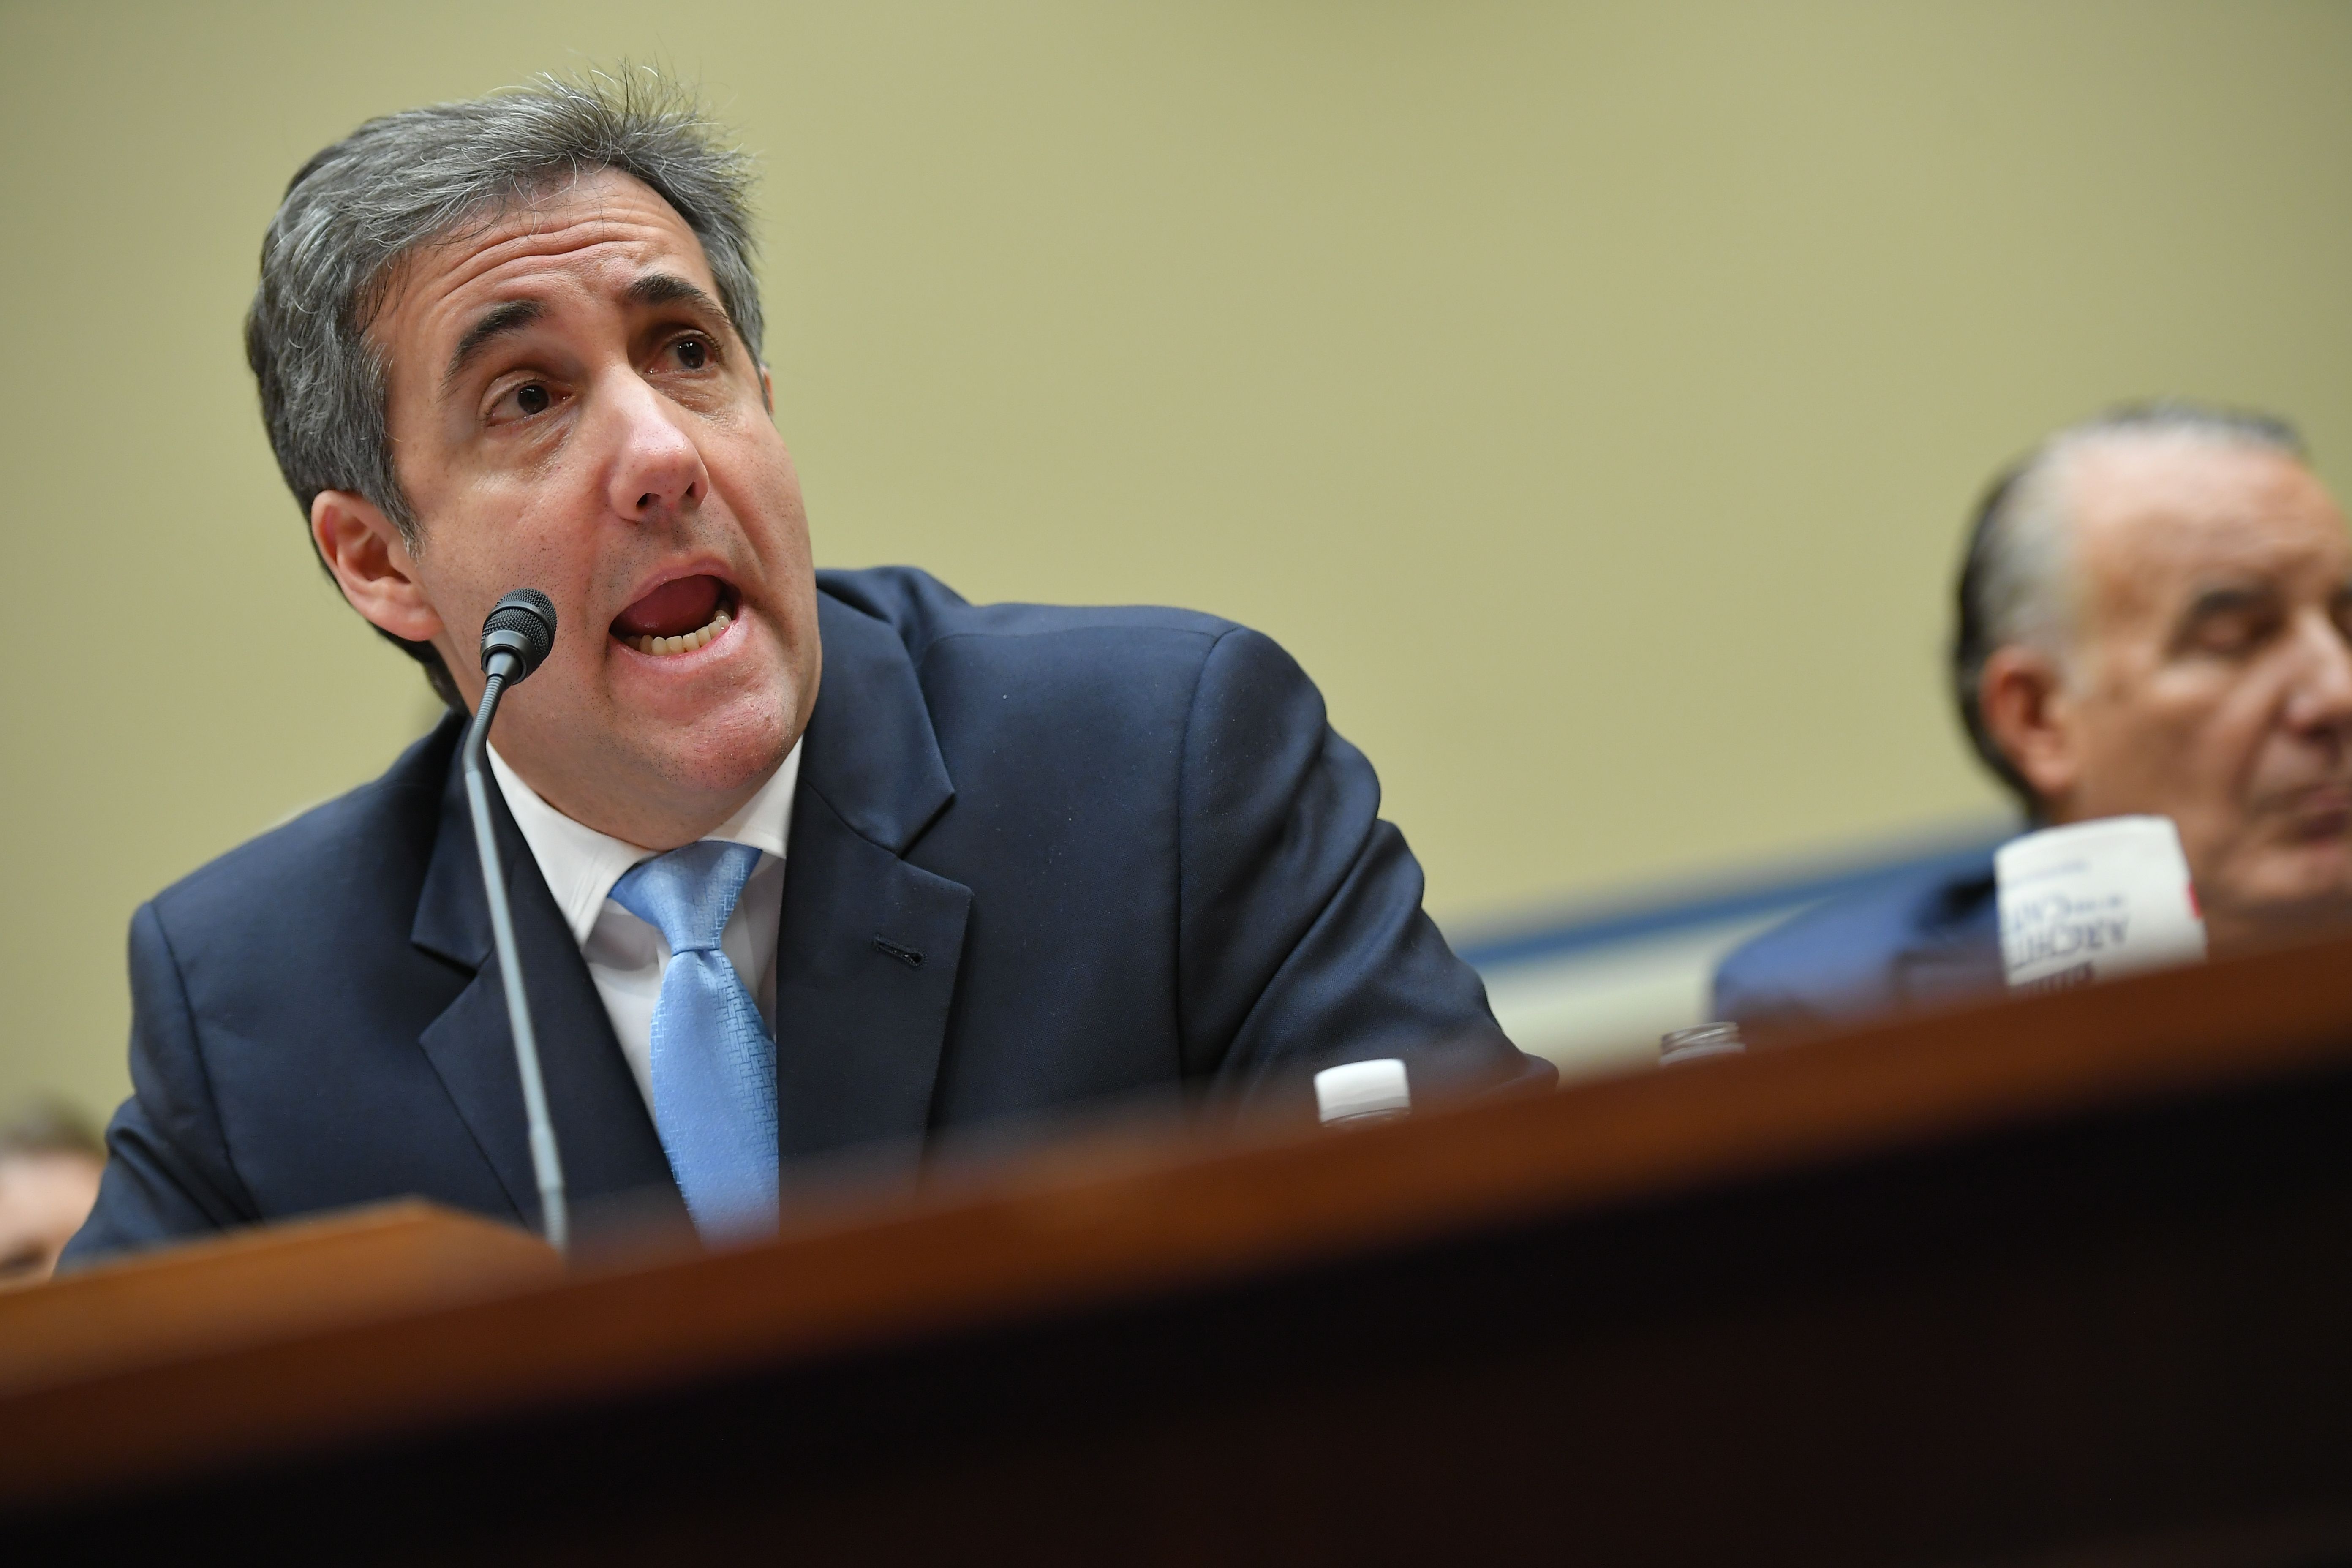 Michael Cohen testifies before the House Oversight and Reform Committee on February 27, 2019. (Mandel Ngan/AFP/Getty Images)